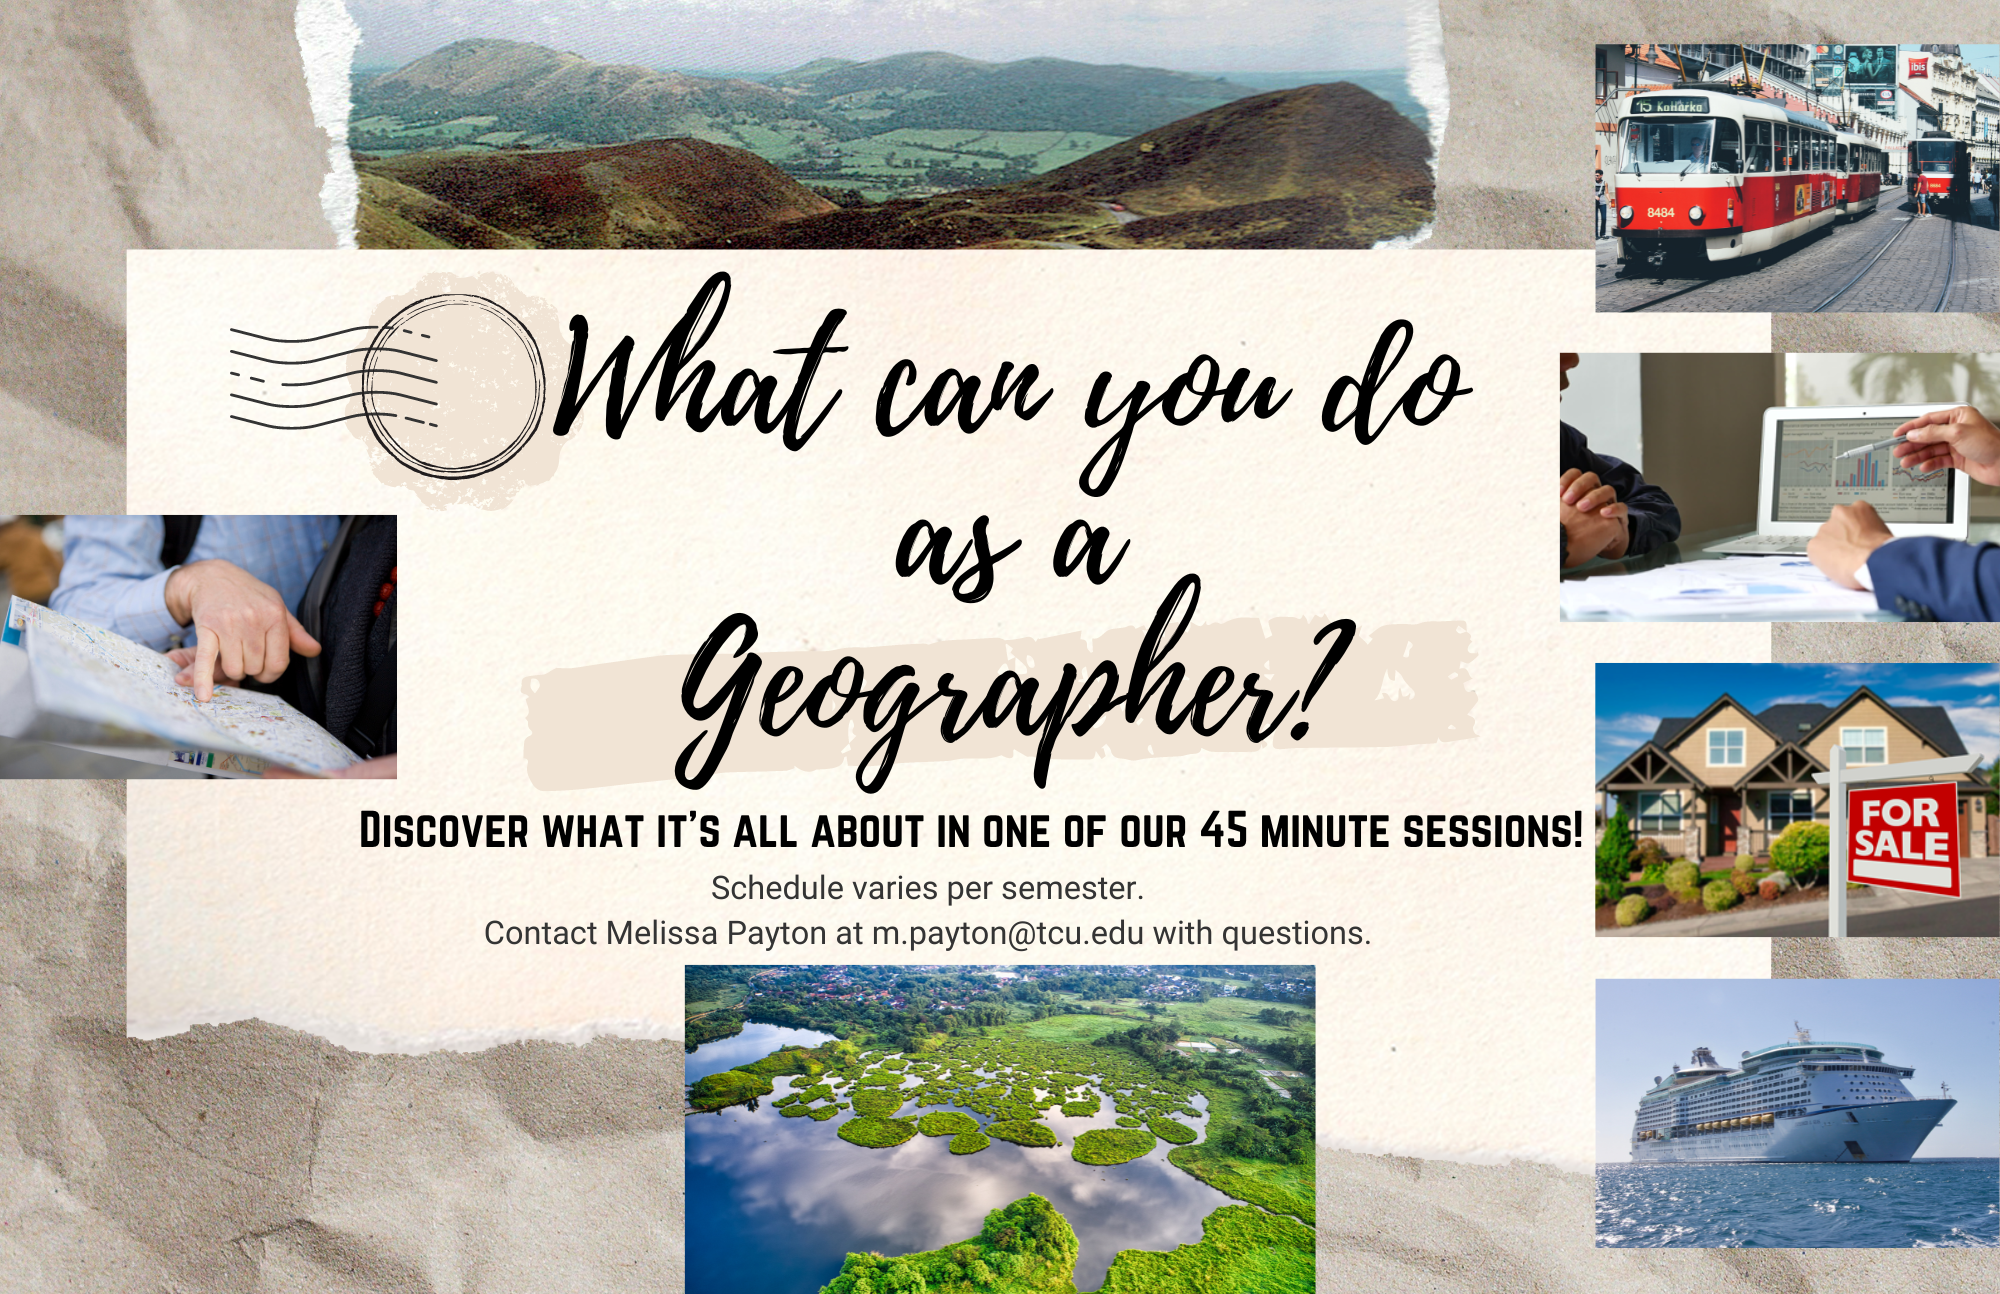 What can you do as a geographer? Attend a 45 minute session! Contact Melissa Payton at m.payton@tcu.edu